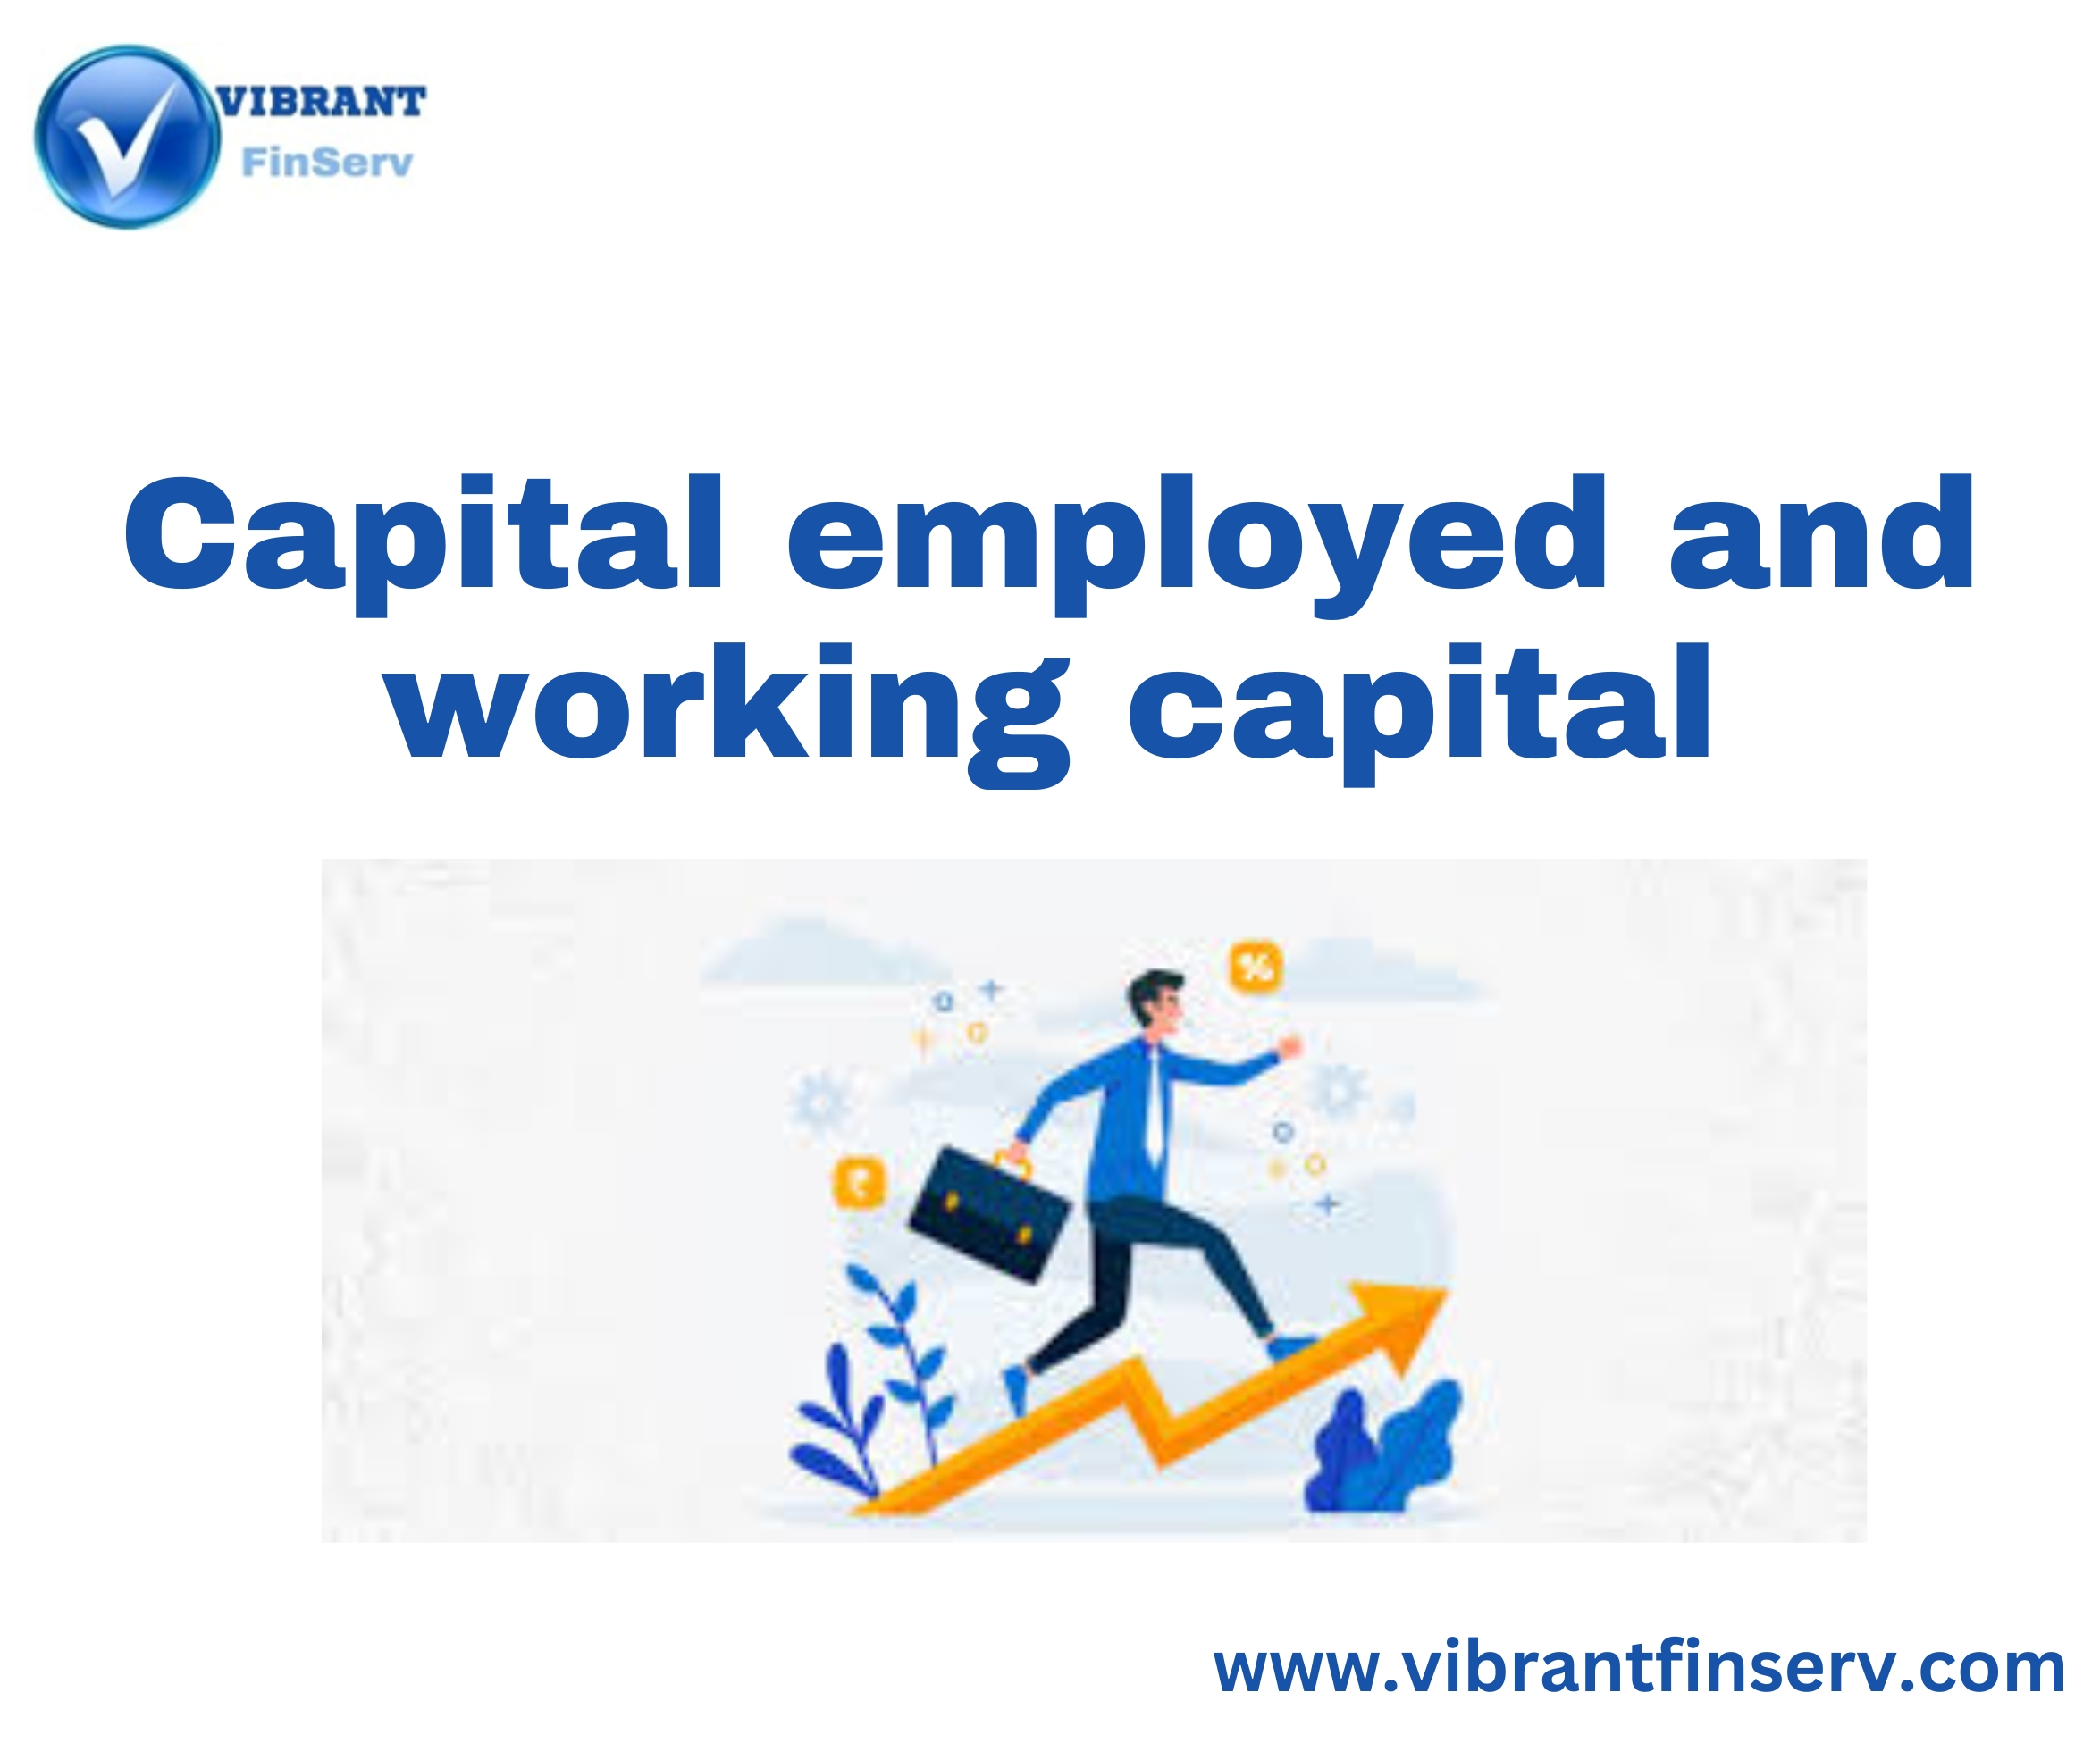 Capital employed and working capital